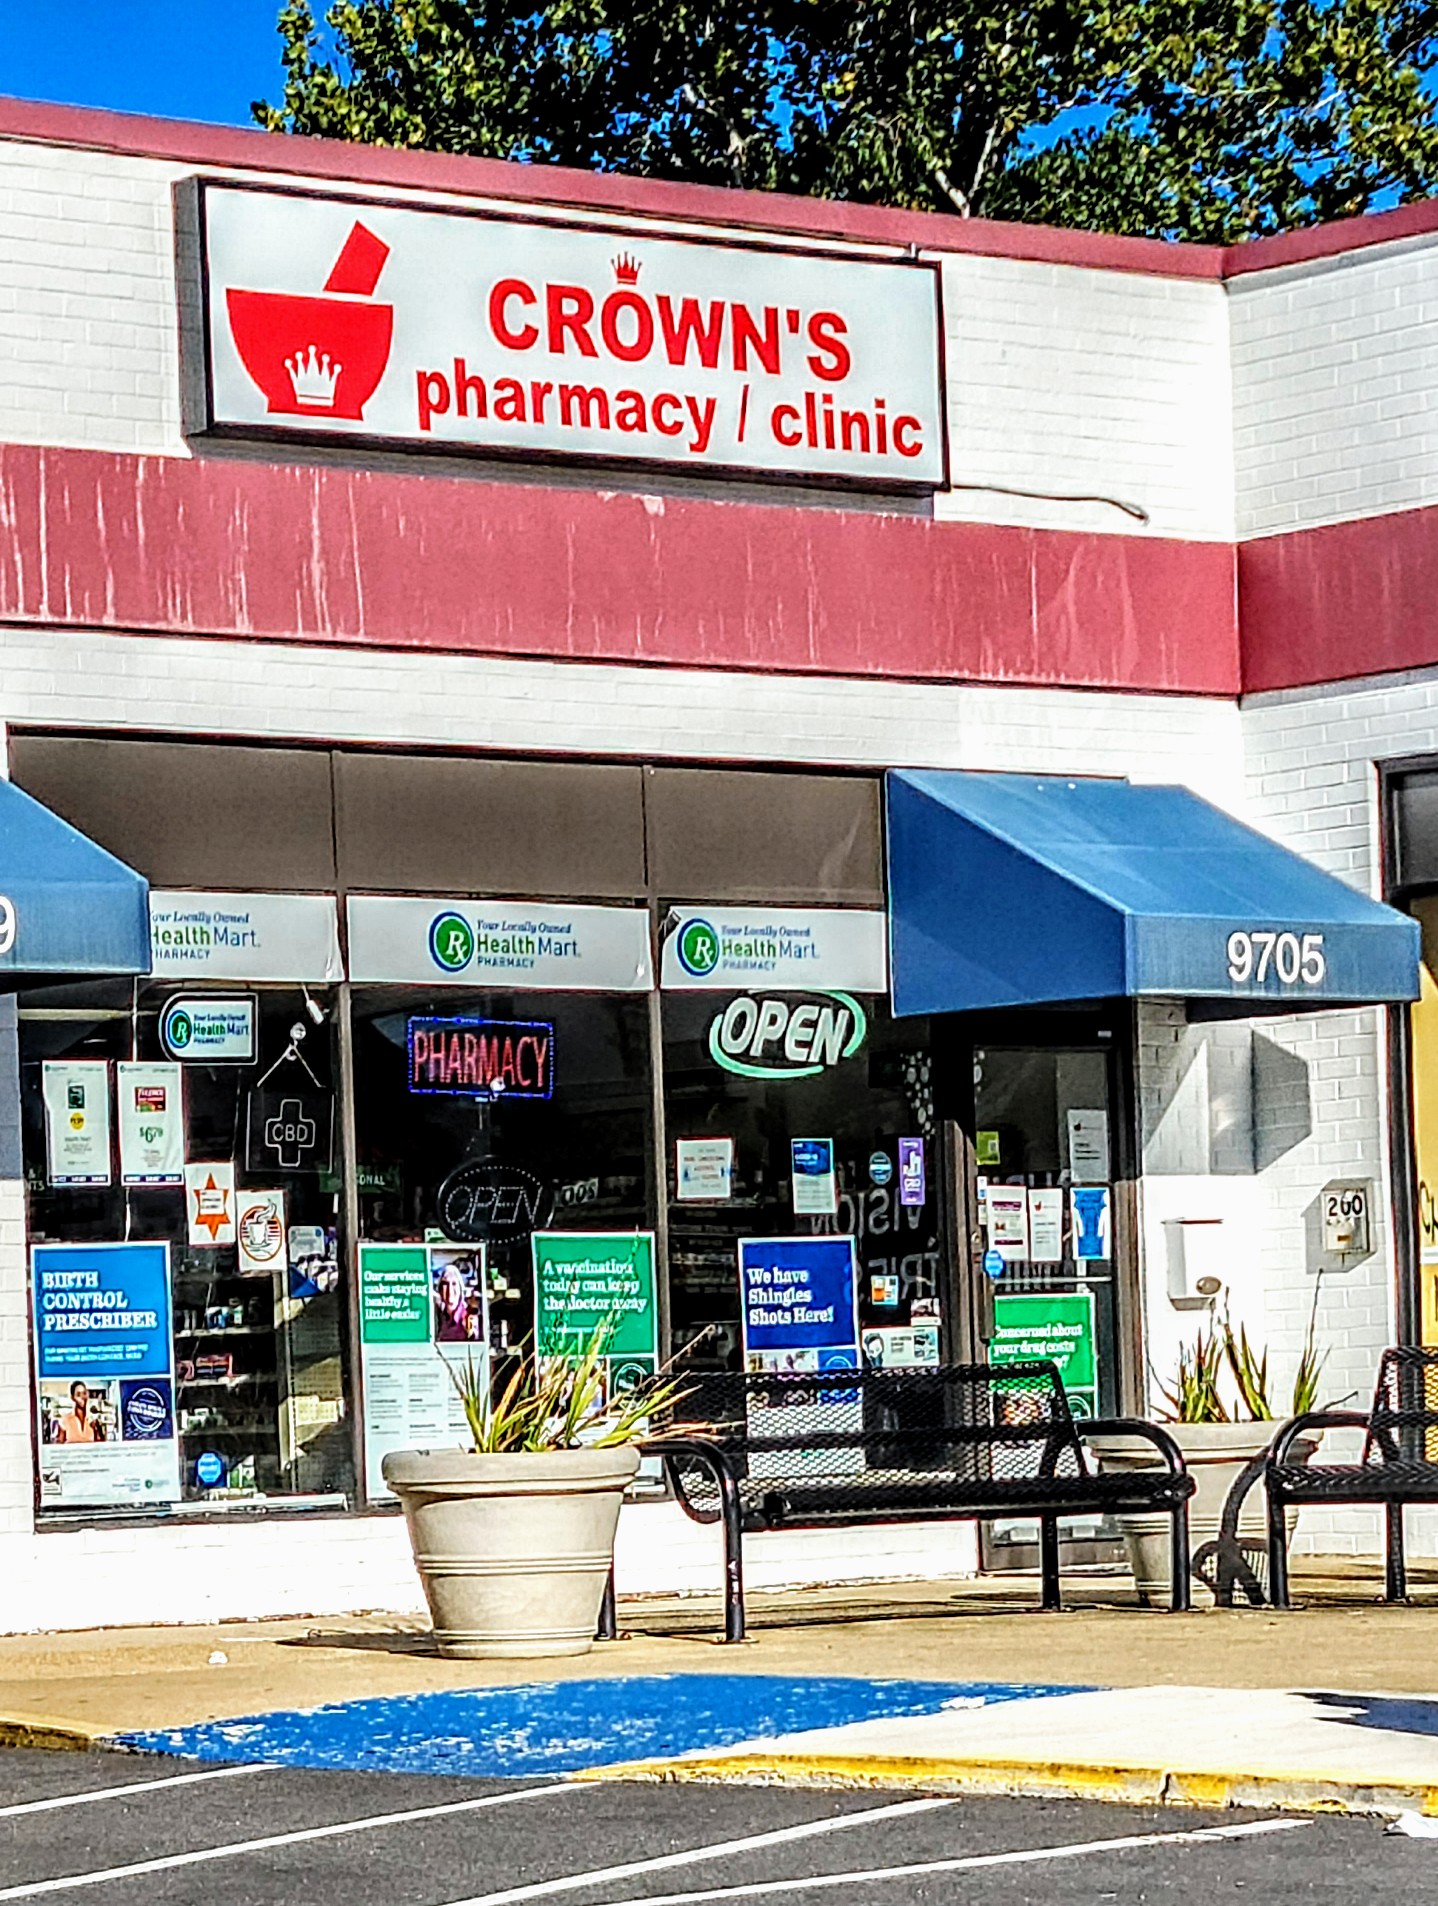 Crowns Pharmacy and Clinic